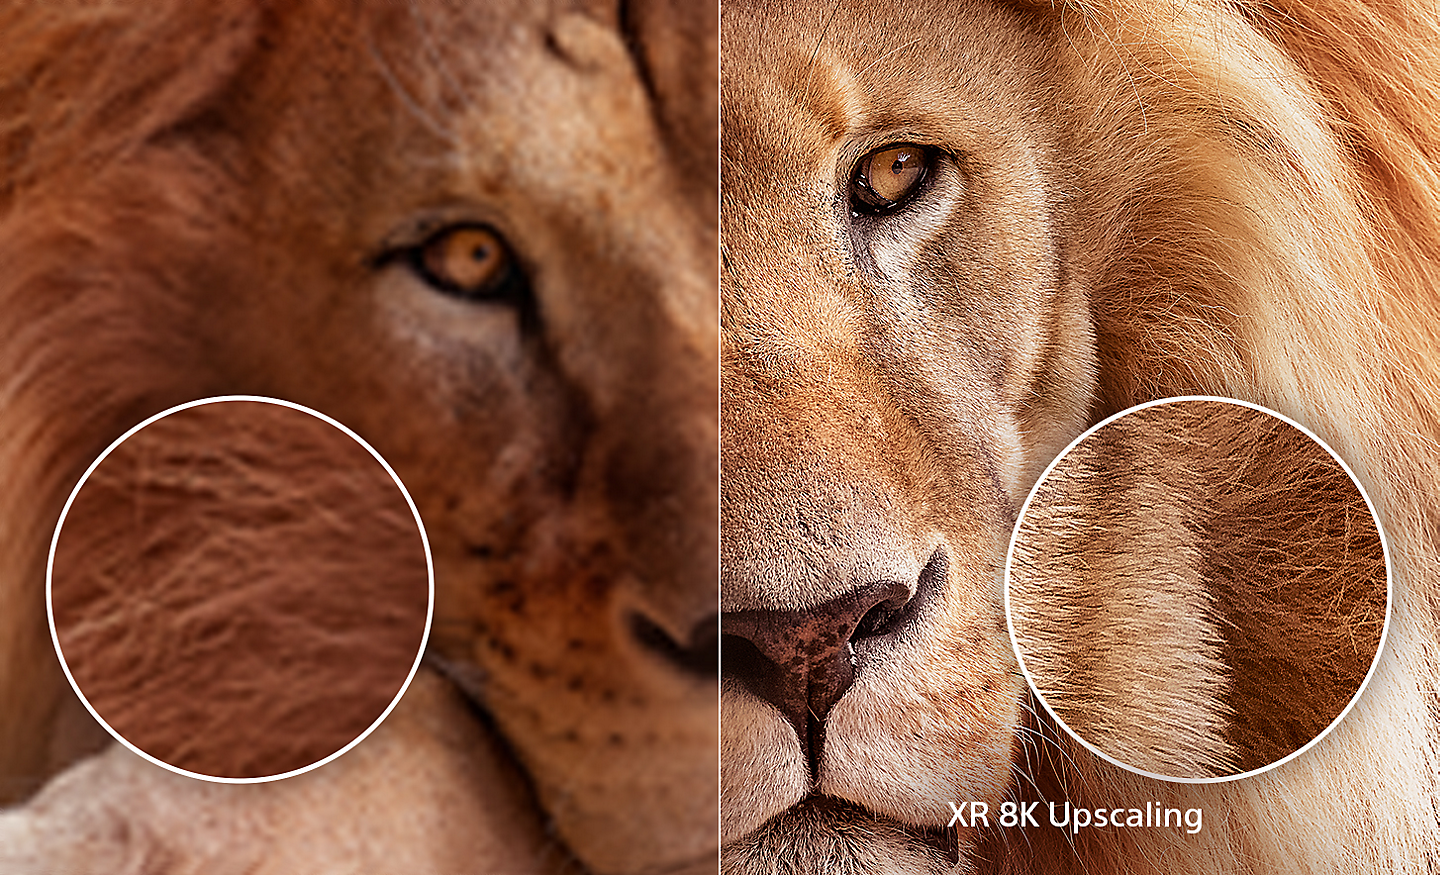 Split screen of lion's head with right side showing the extra detail after XR 8K Upscaling